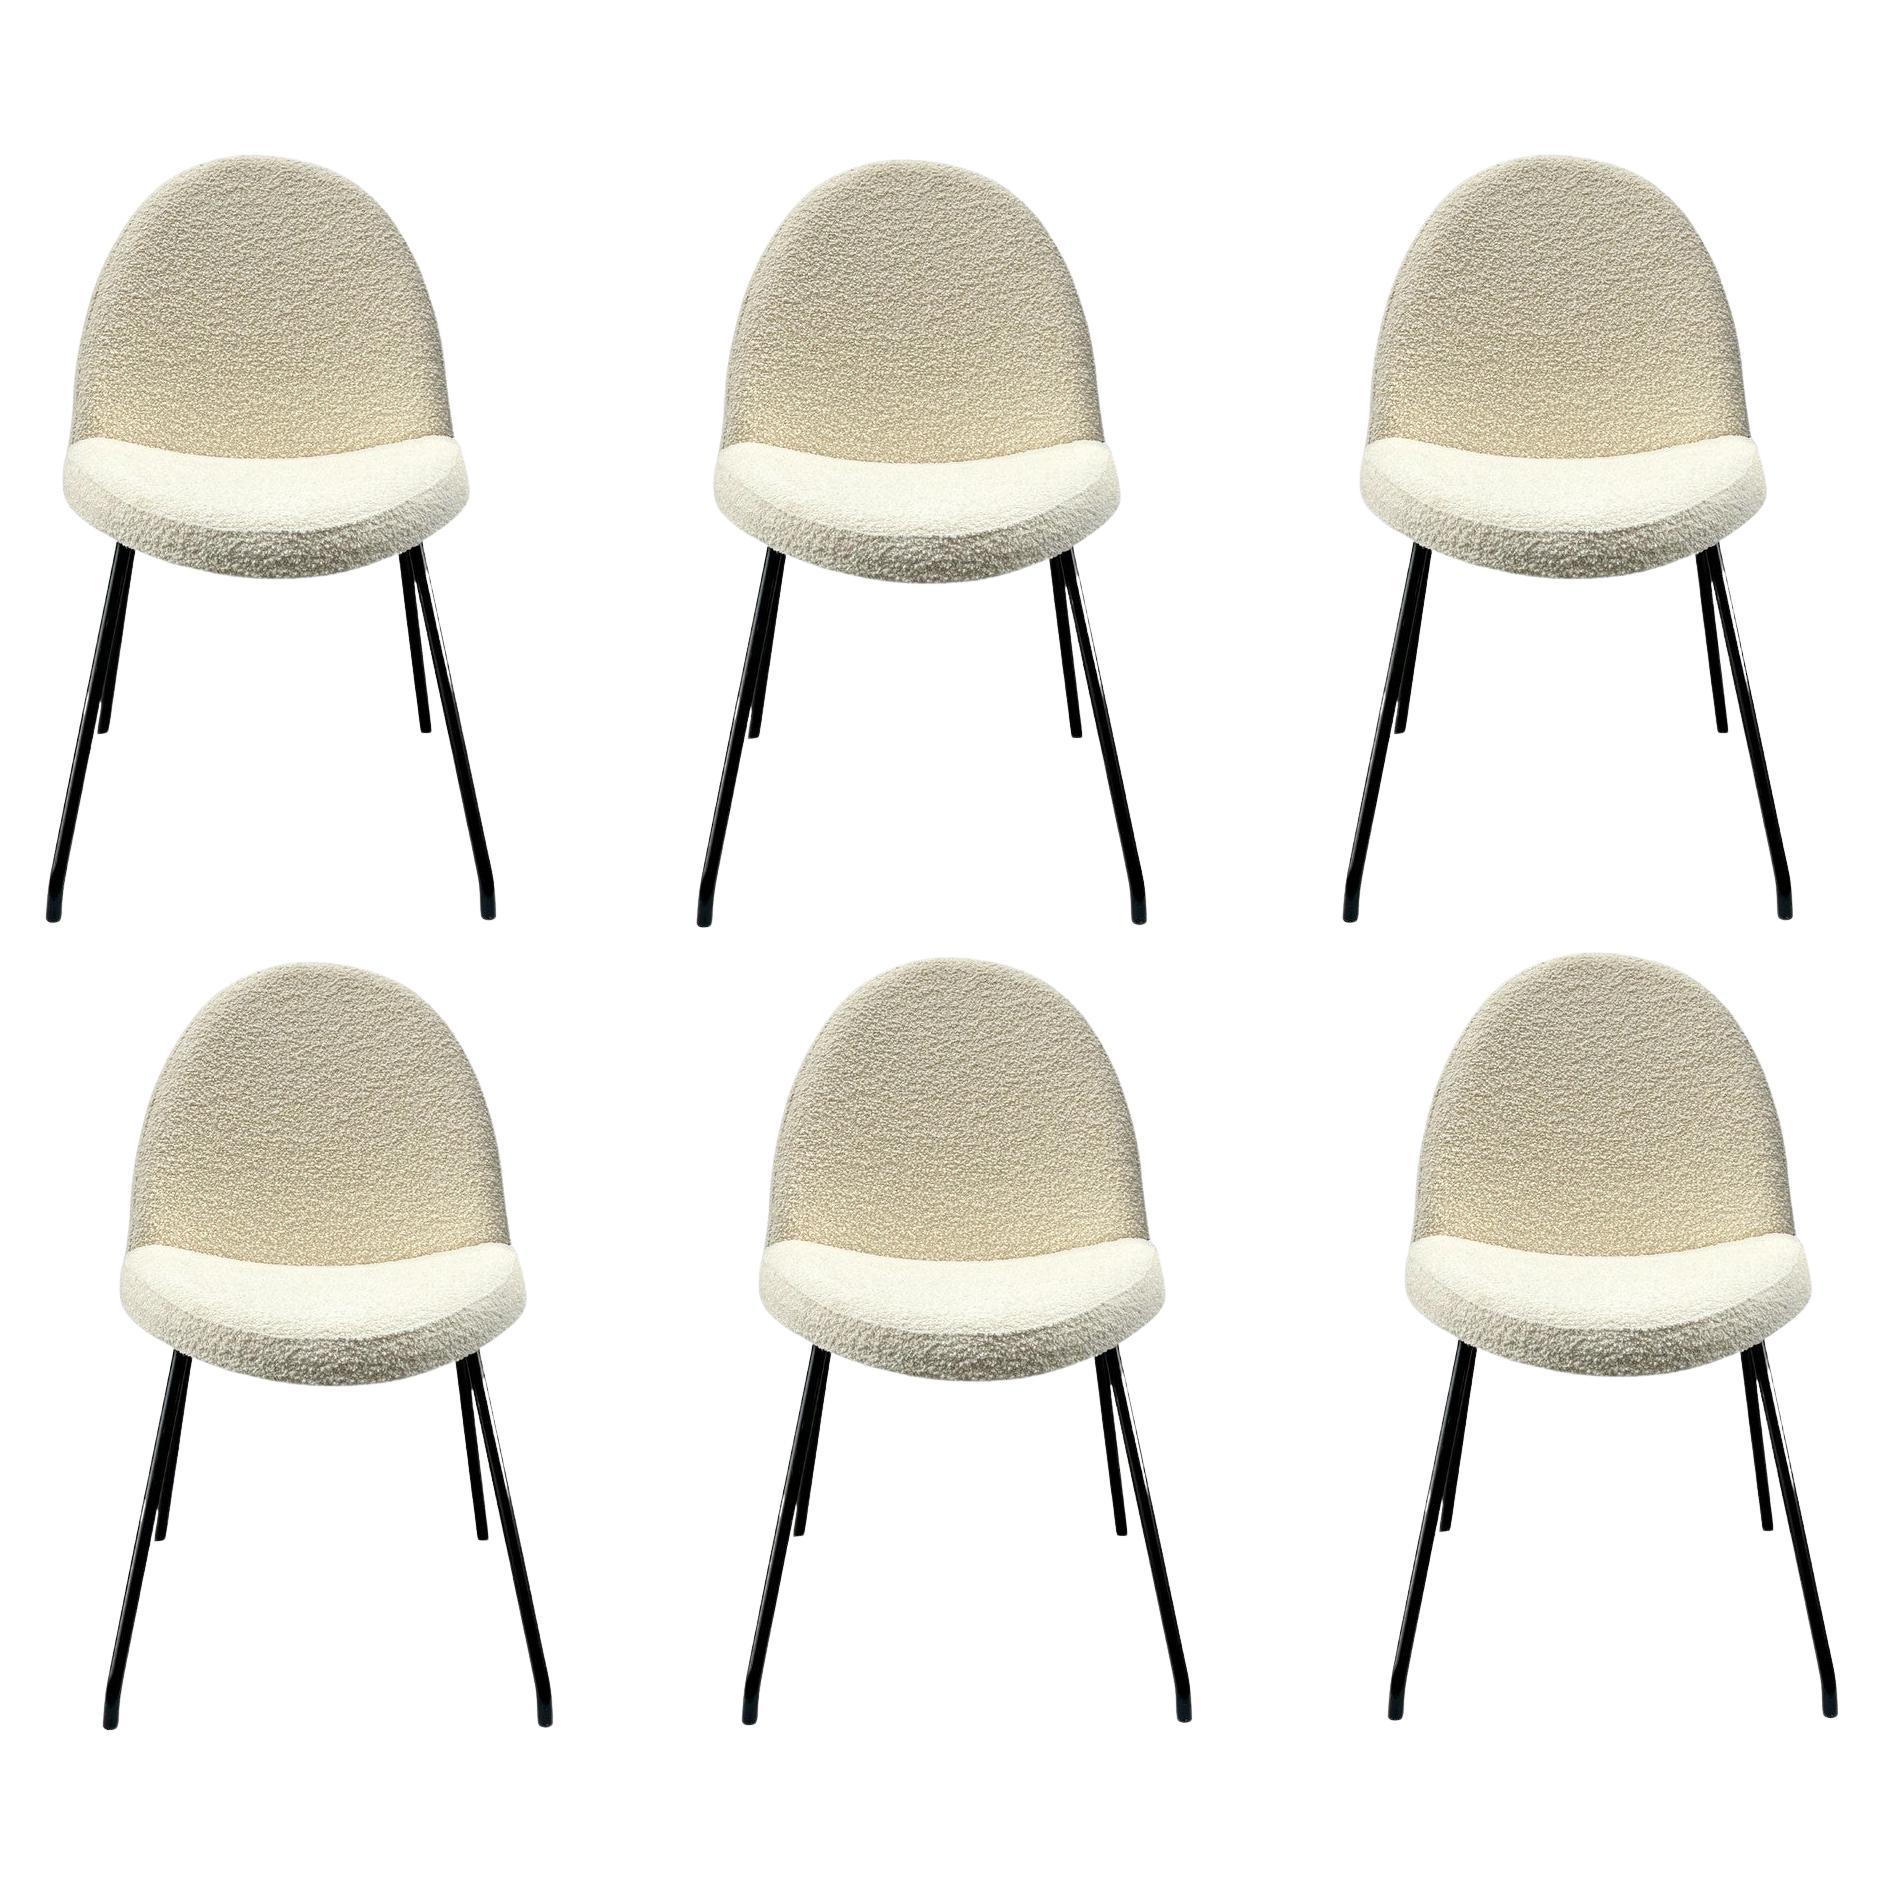 Set of Six "Tongue" Chairs, Joseph-André Motte for Steiner, France 1954 For Sale